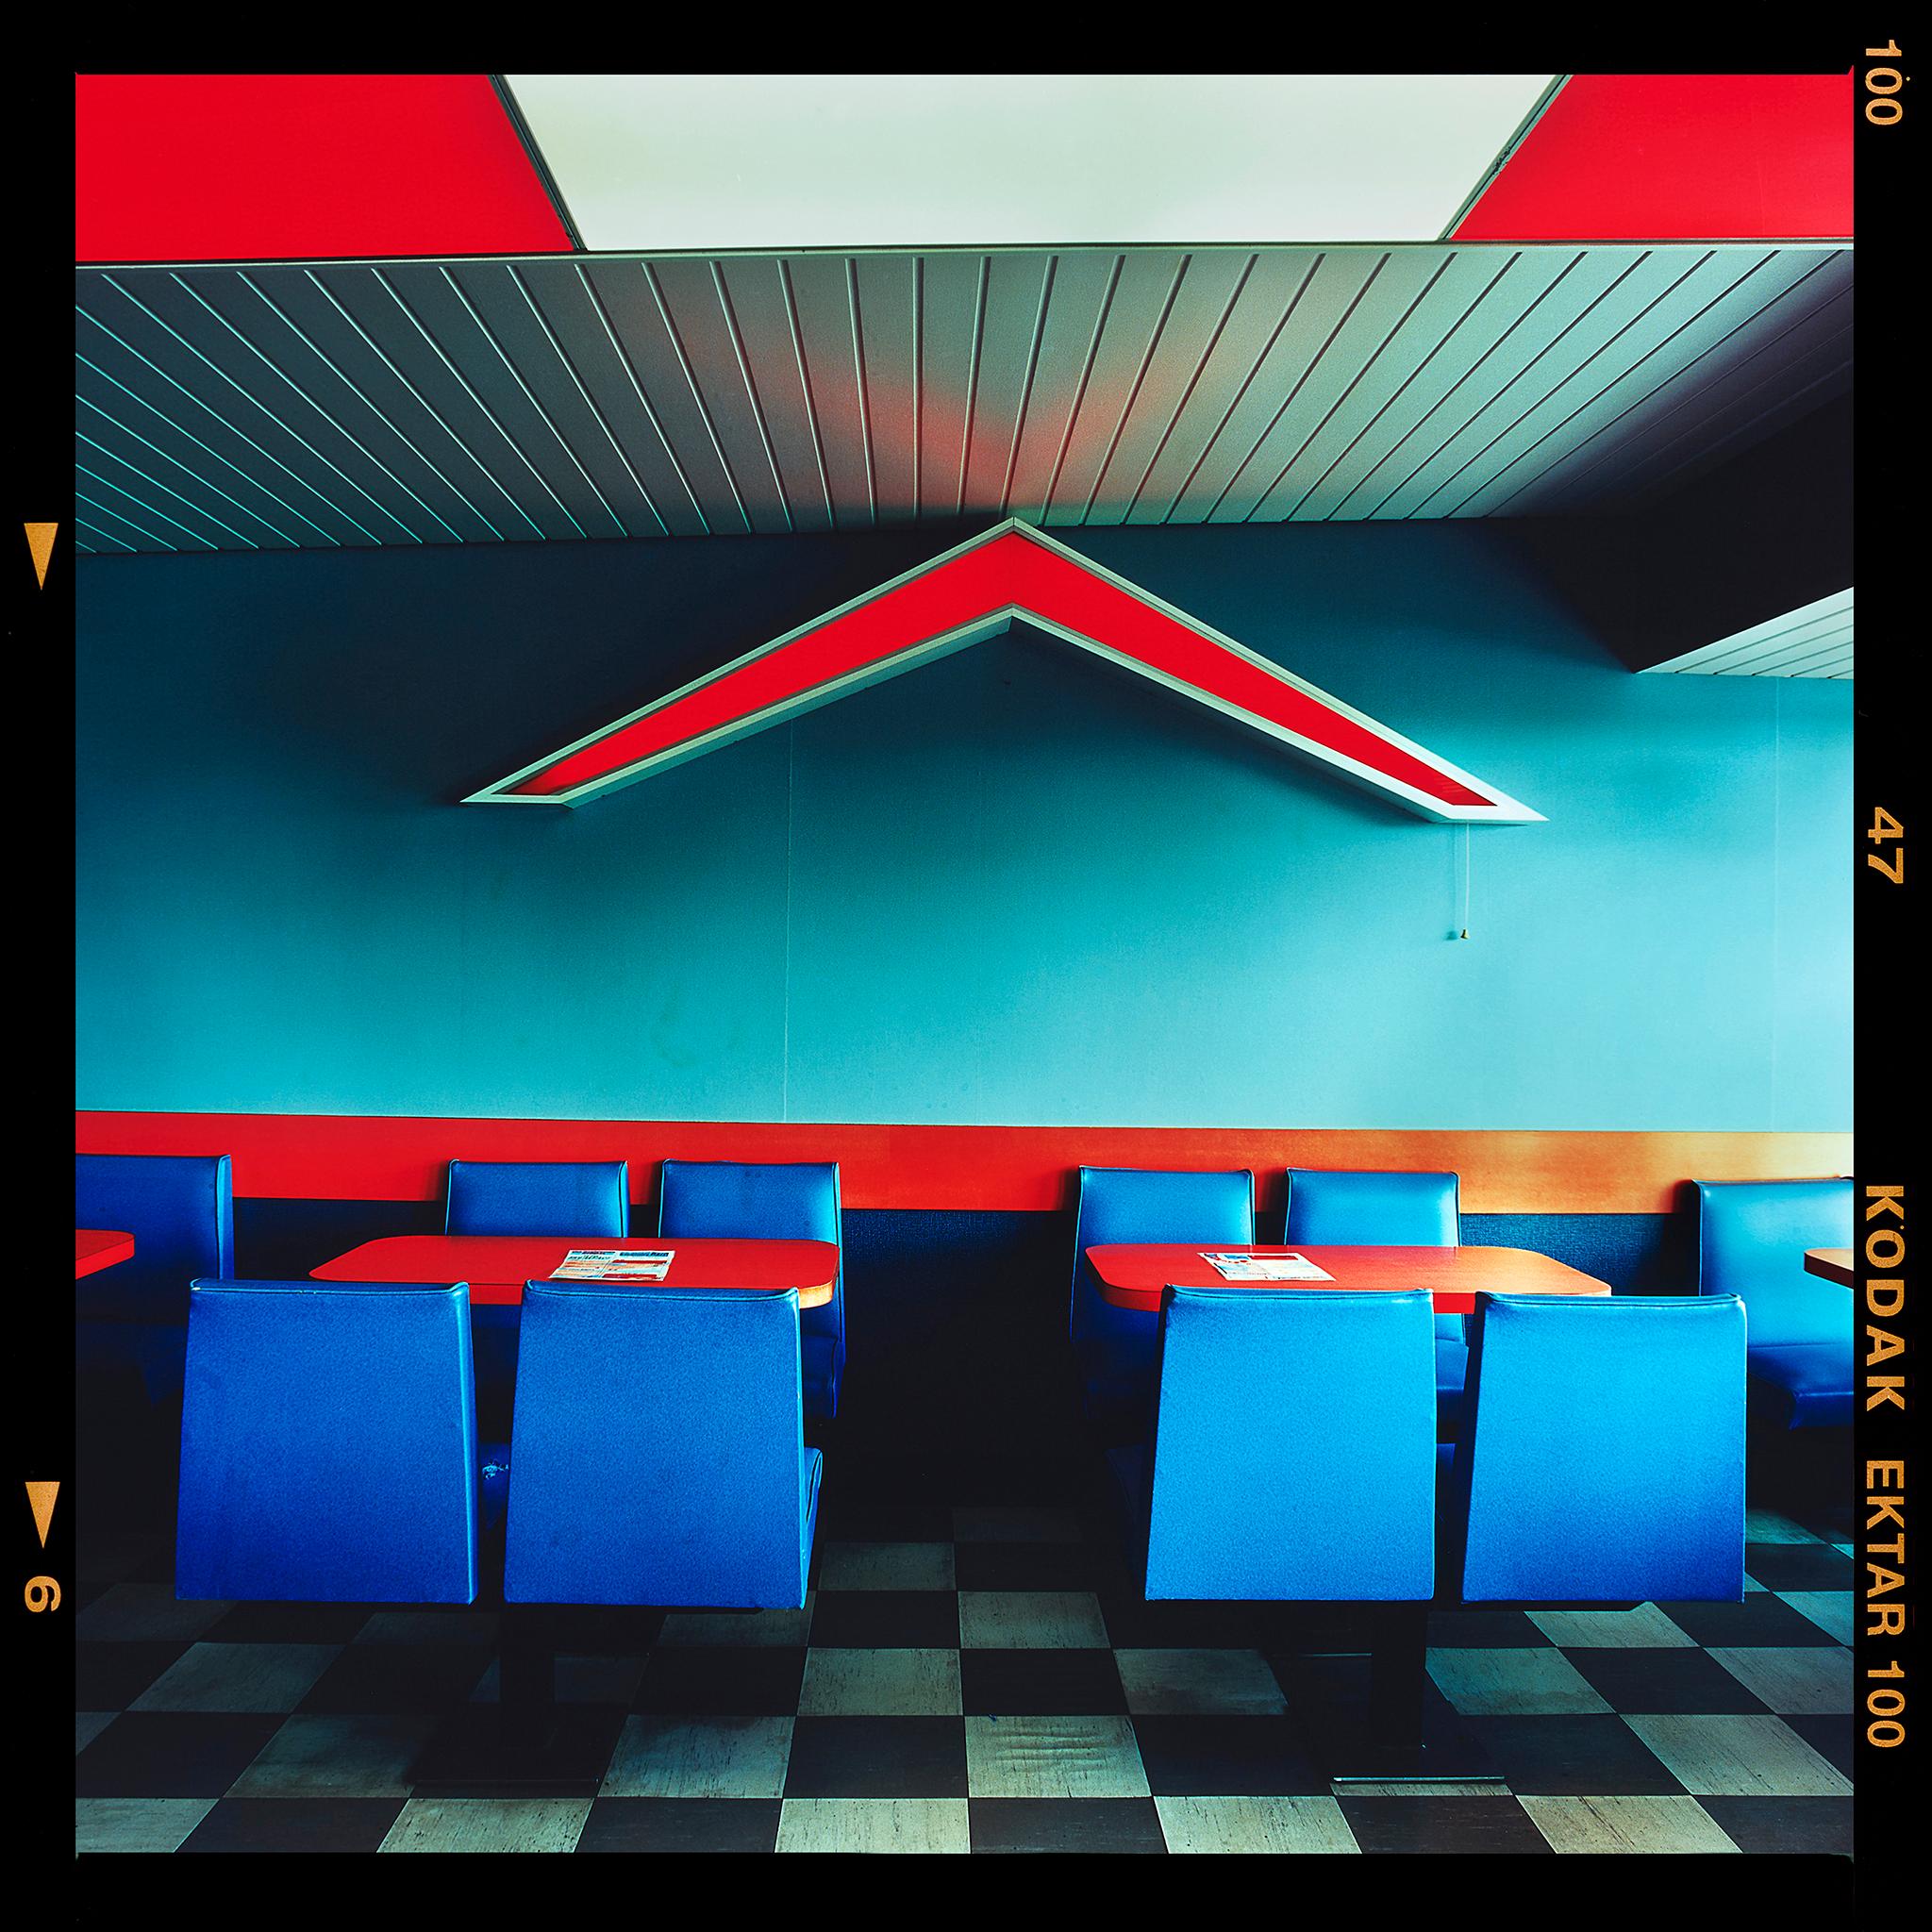 Chevron - Vintage Wimpy, Norfolk, 2023 photograph by Richard Heeps captures the style of an American diner, via Norfolk in England. The vintage interior has a sense of  nostalgia.

This artwork is a limited edition of 25 gloss photographic print